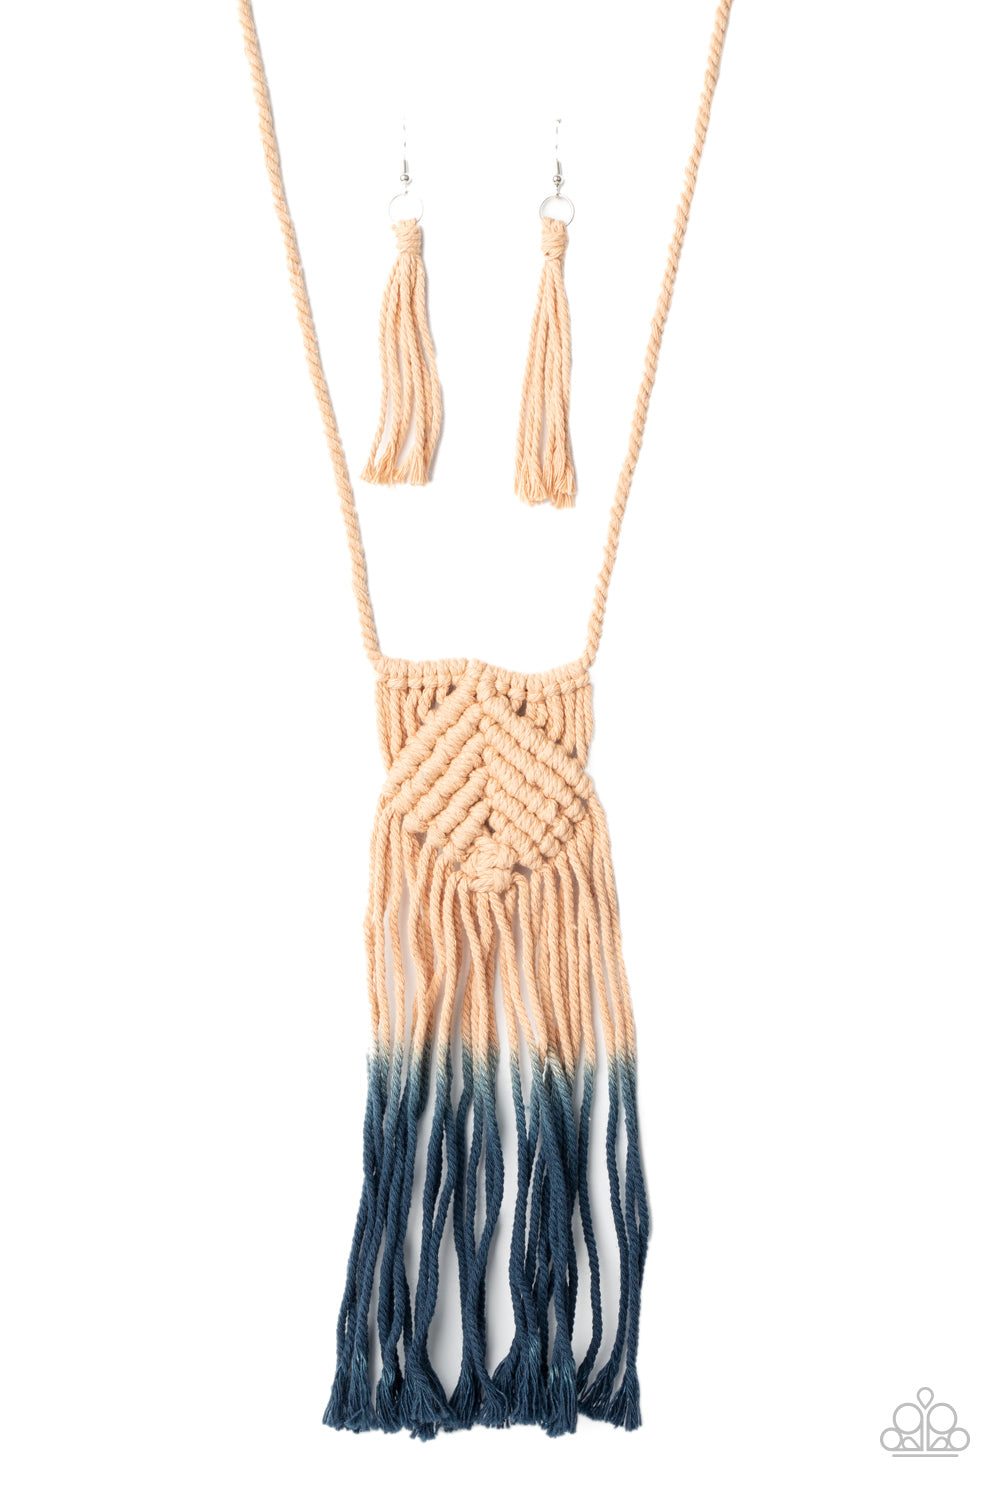 Look At MACRAME Now - Blue - Gtdazzlequeen